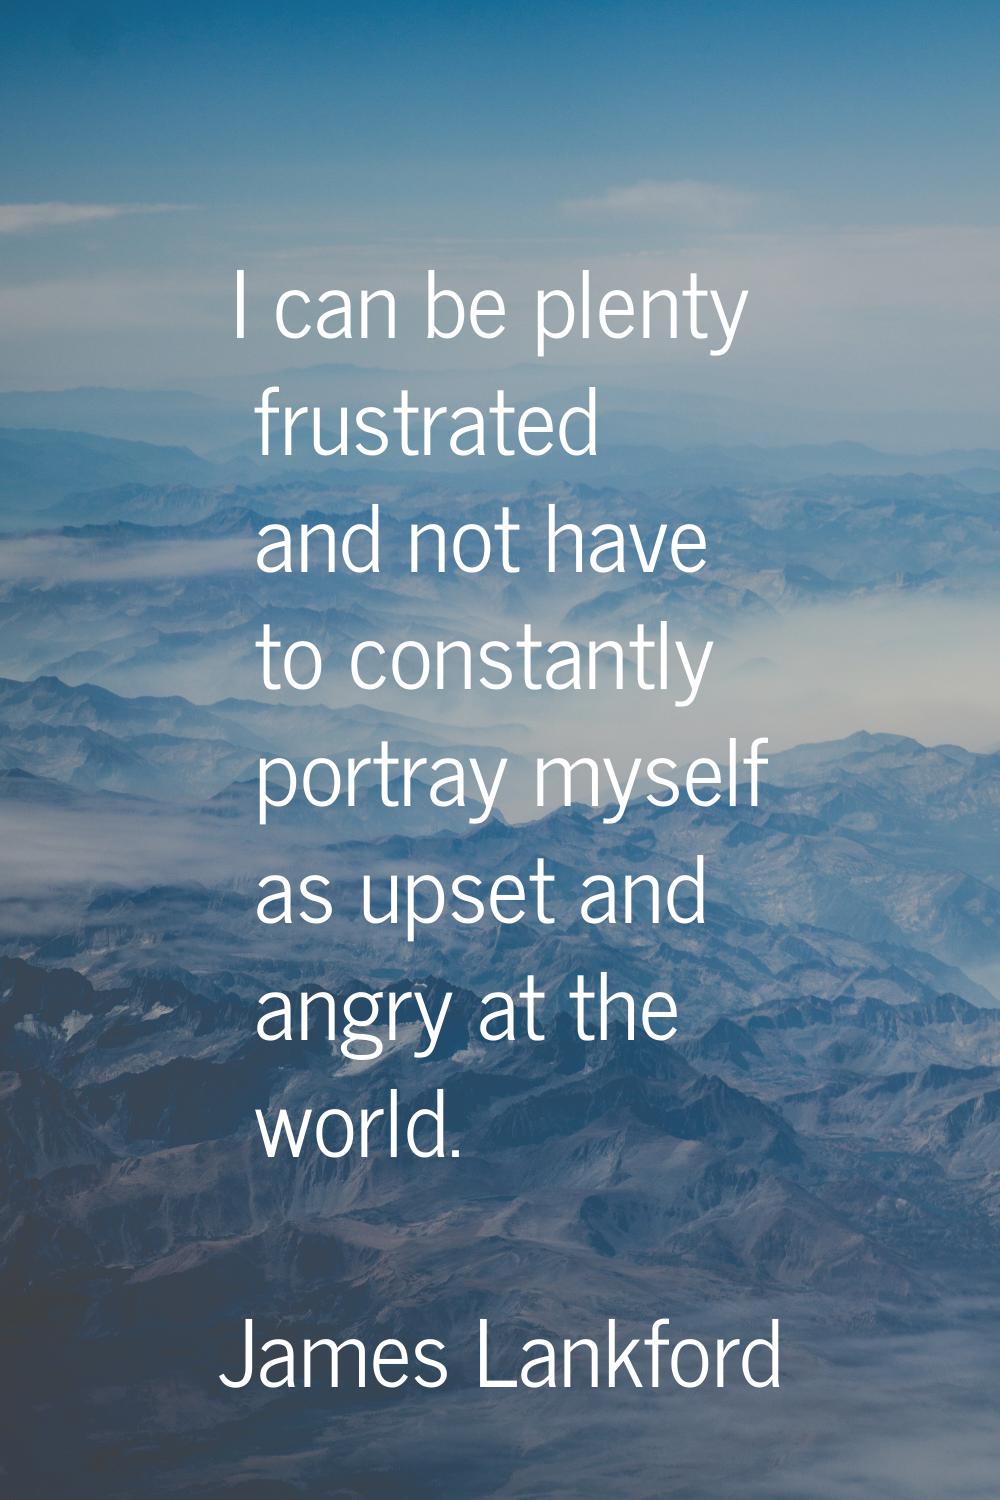 I can be plenty frustrated and not have to constantly portray myself as upset and angry at the worl